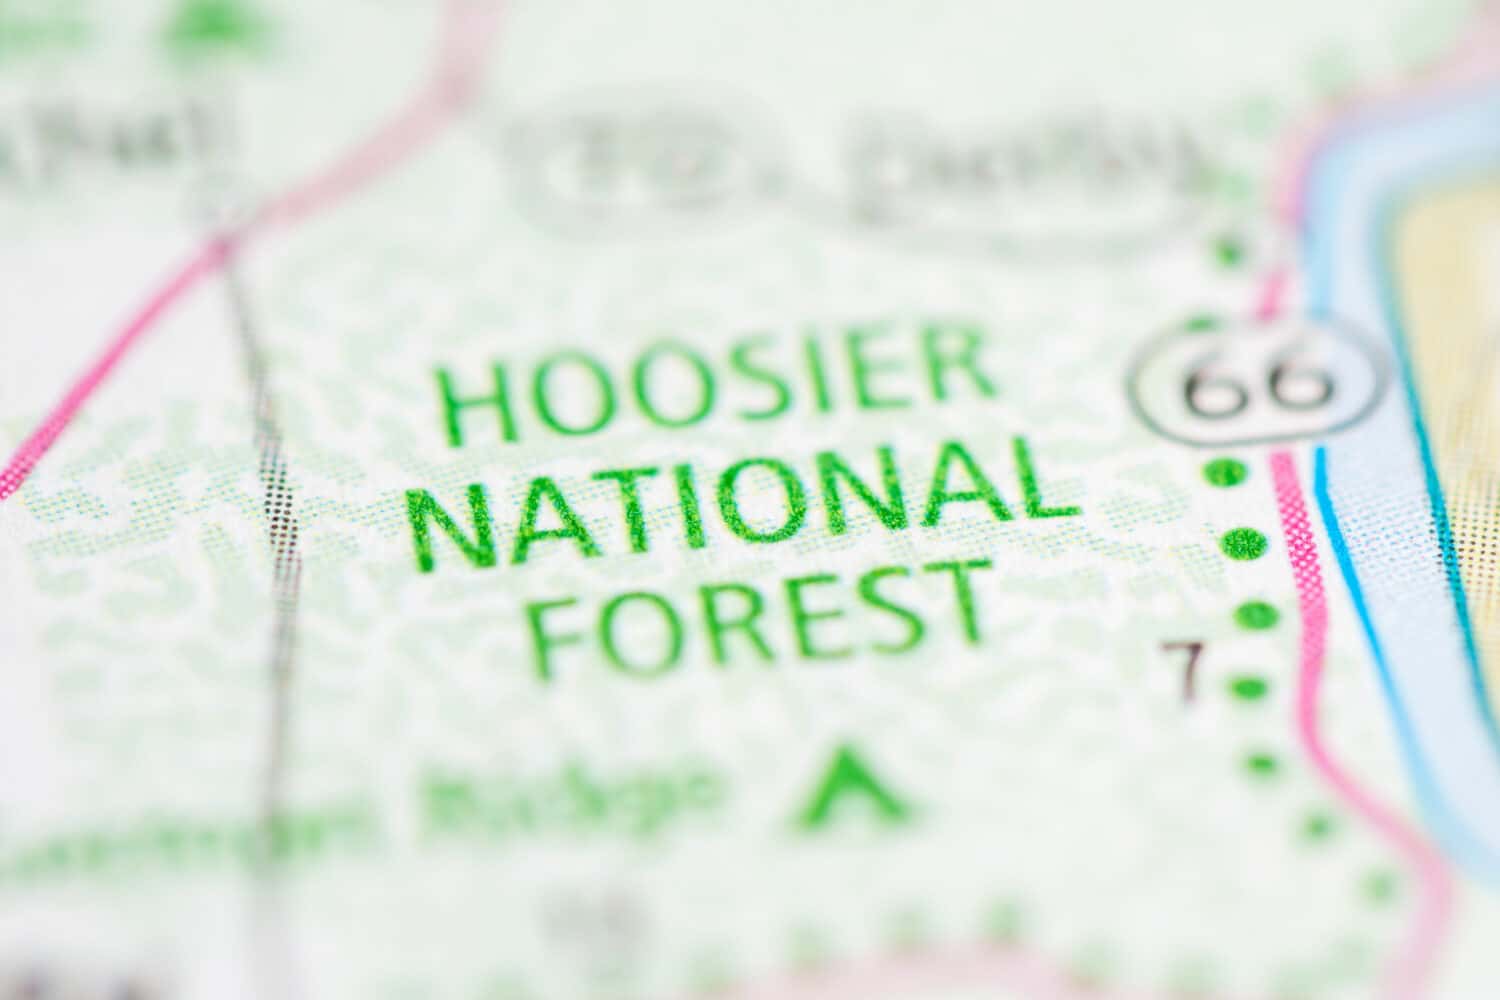 Hoosier National Forest. Indiana. USA